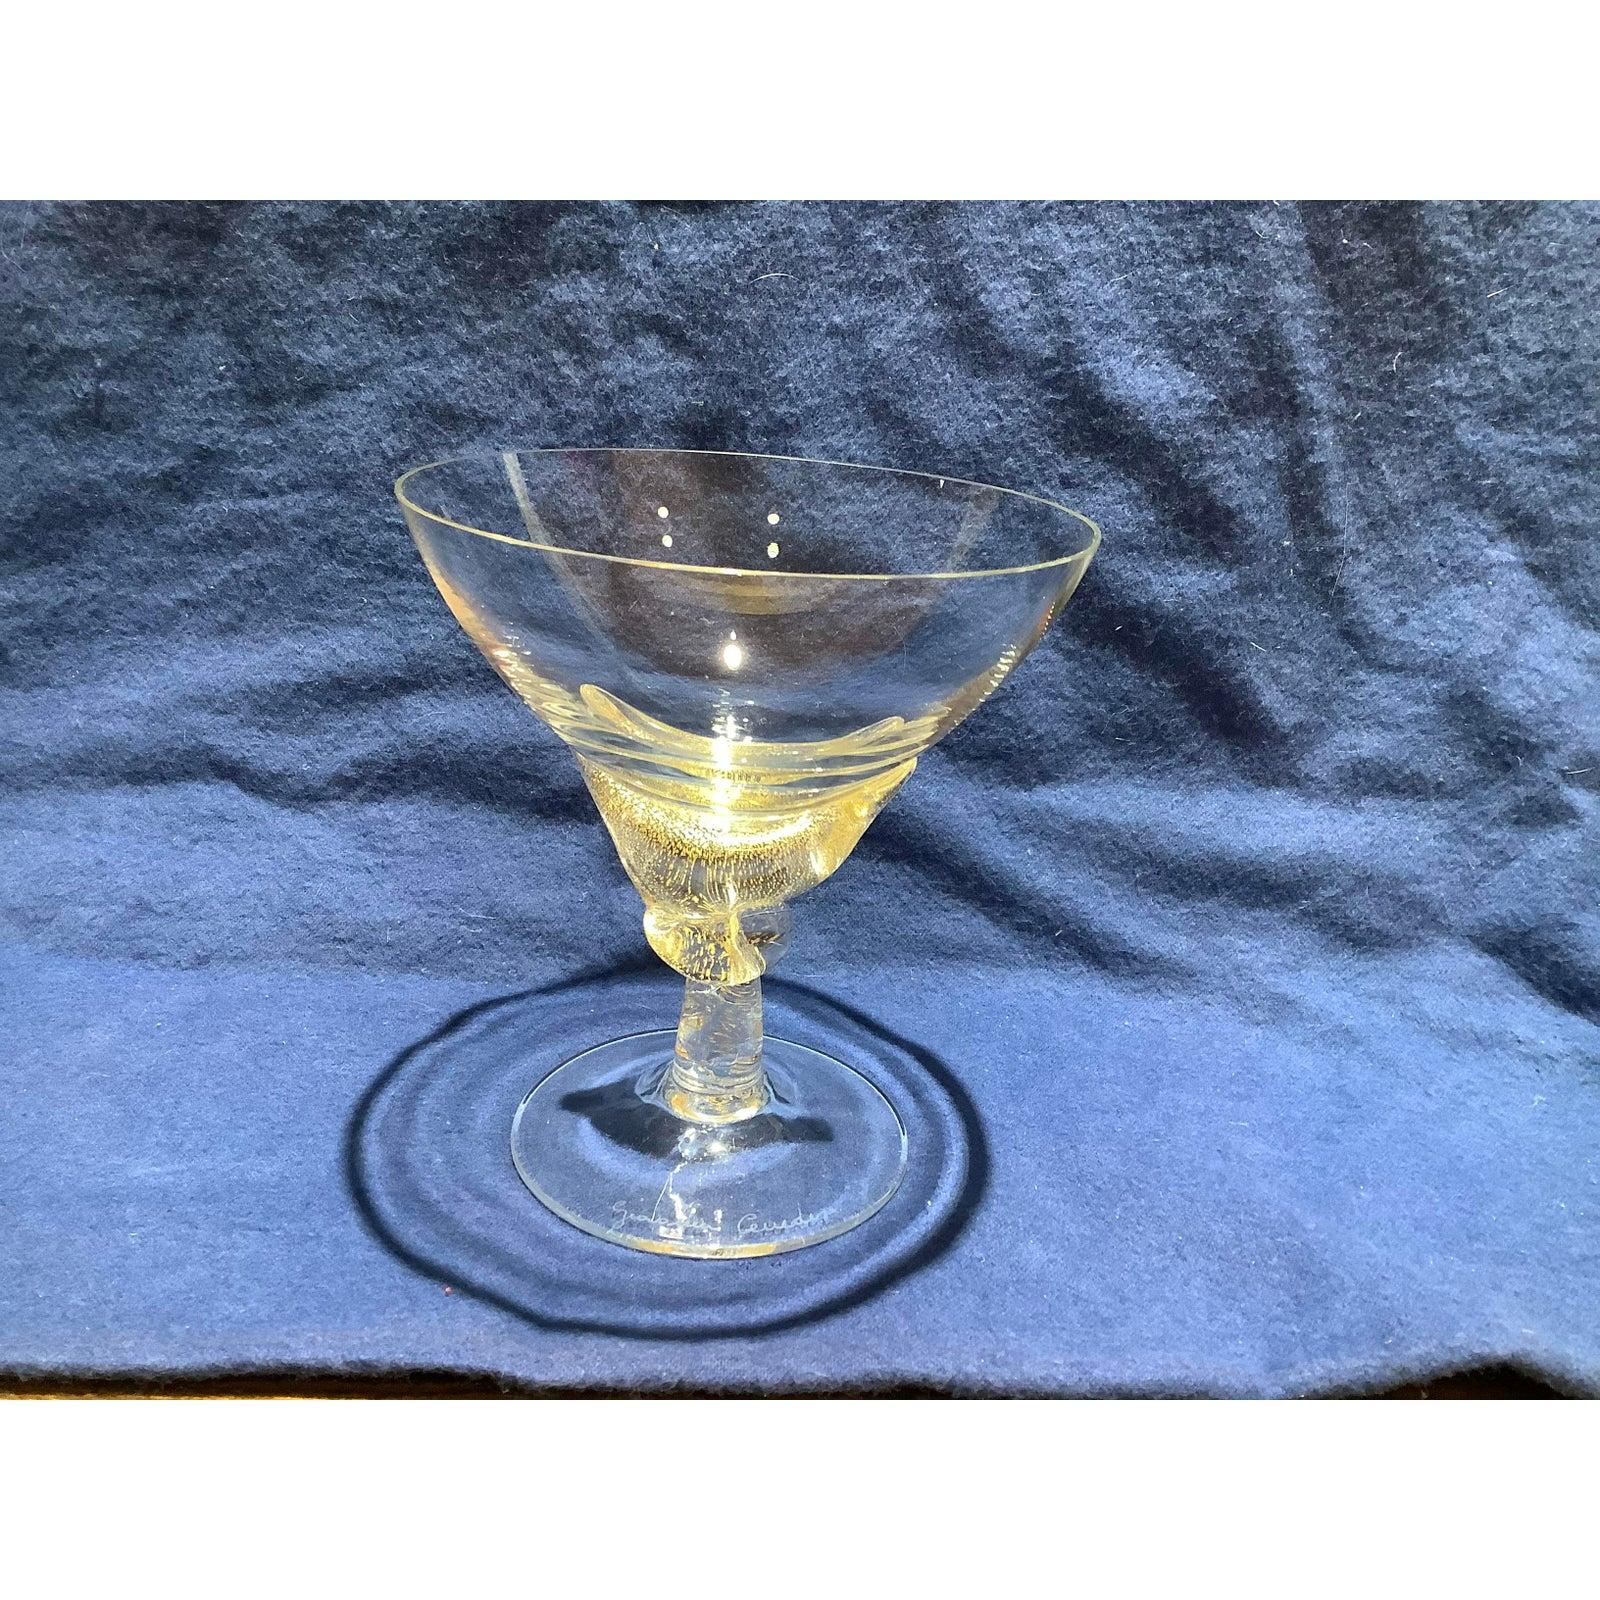 Custom murano glass desert coupes or champagne flutes from the 1970s. These are clear glass with a lot of 24-karat gold flakes. The clear glass is smooth on the outside and rippled on the inside.
Each flute is signed Giovanni